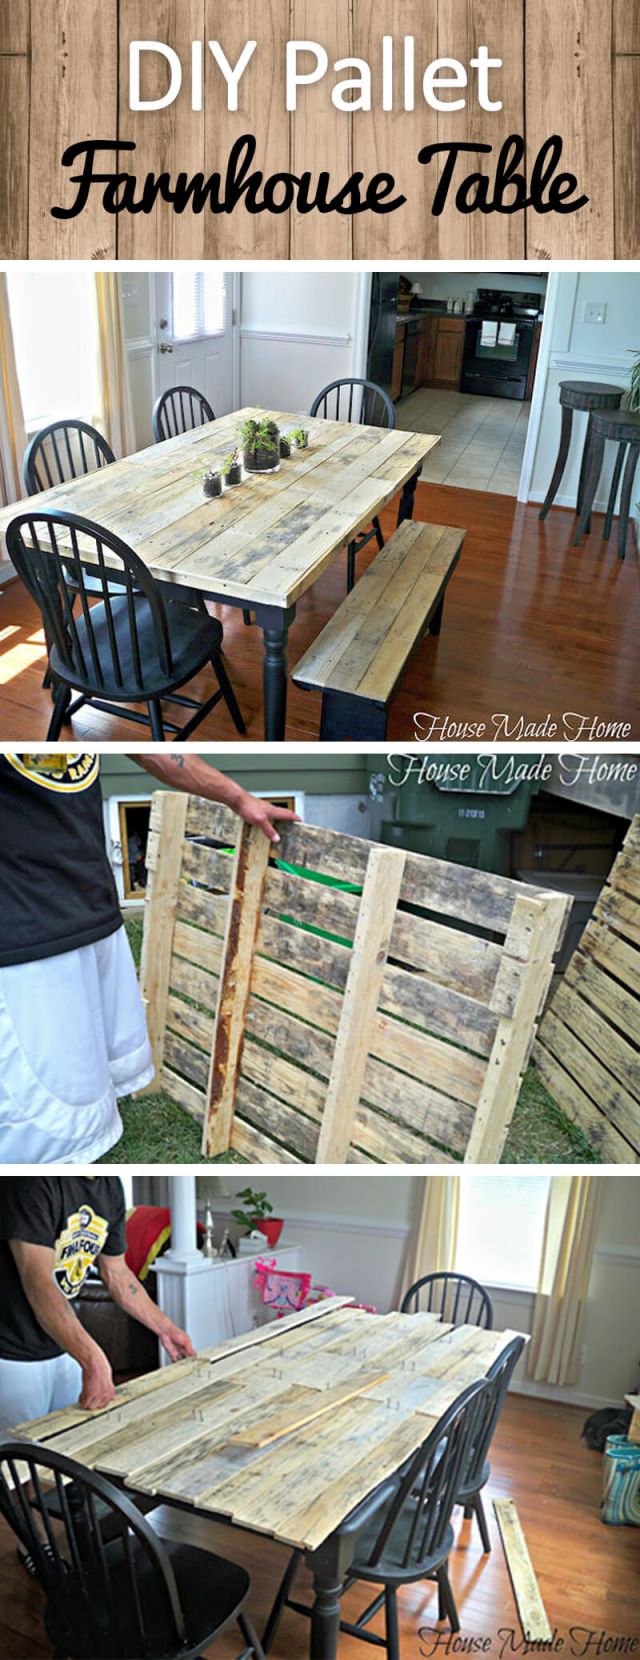  Nice build your own rustic furniture 